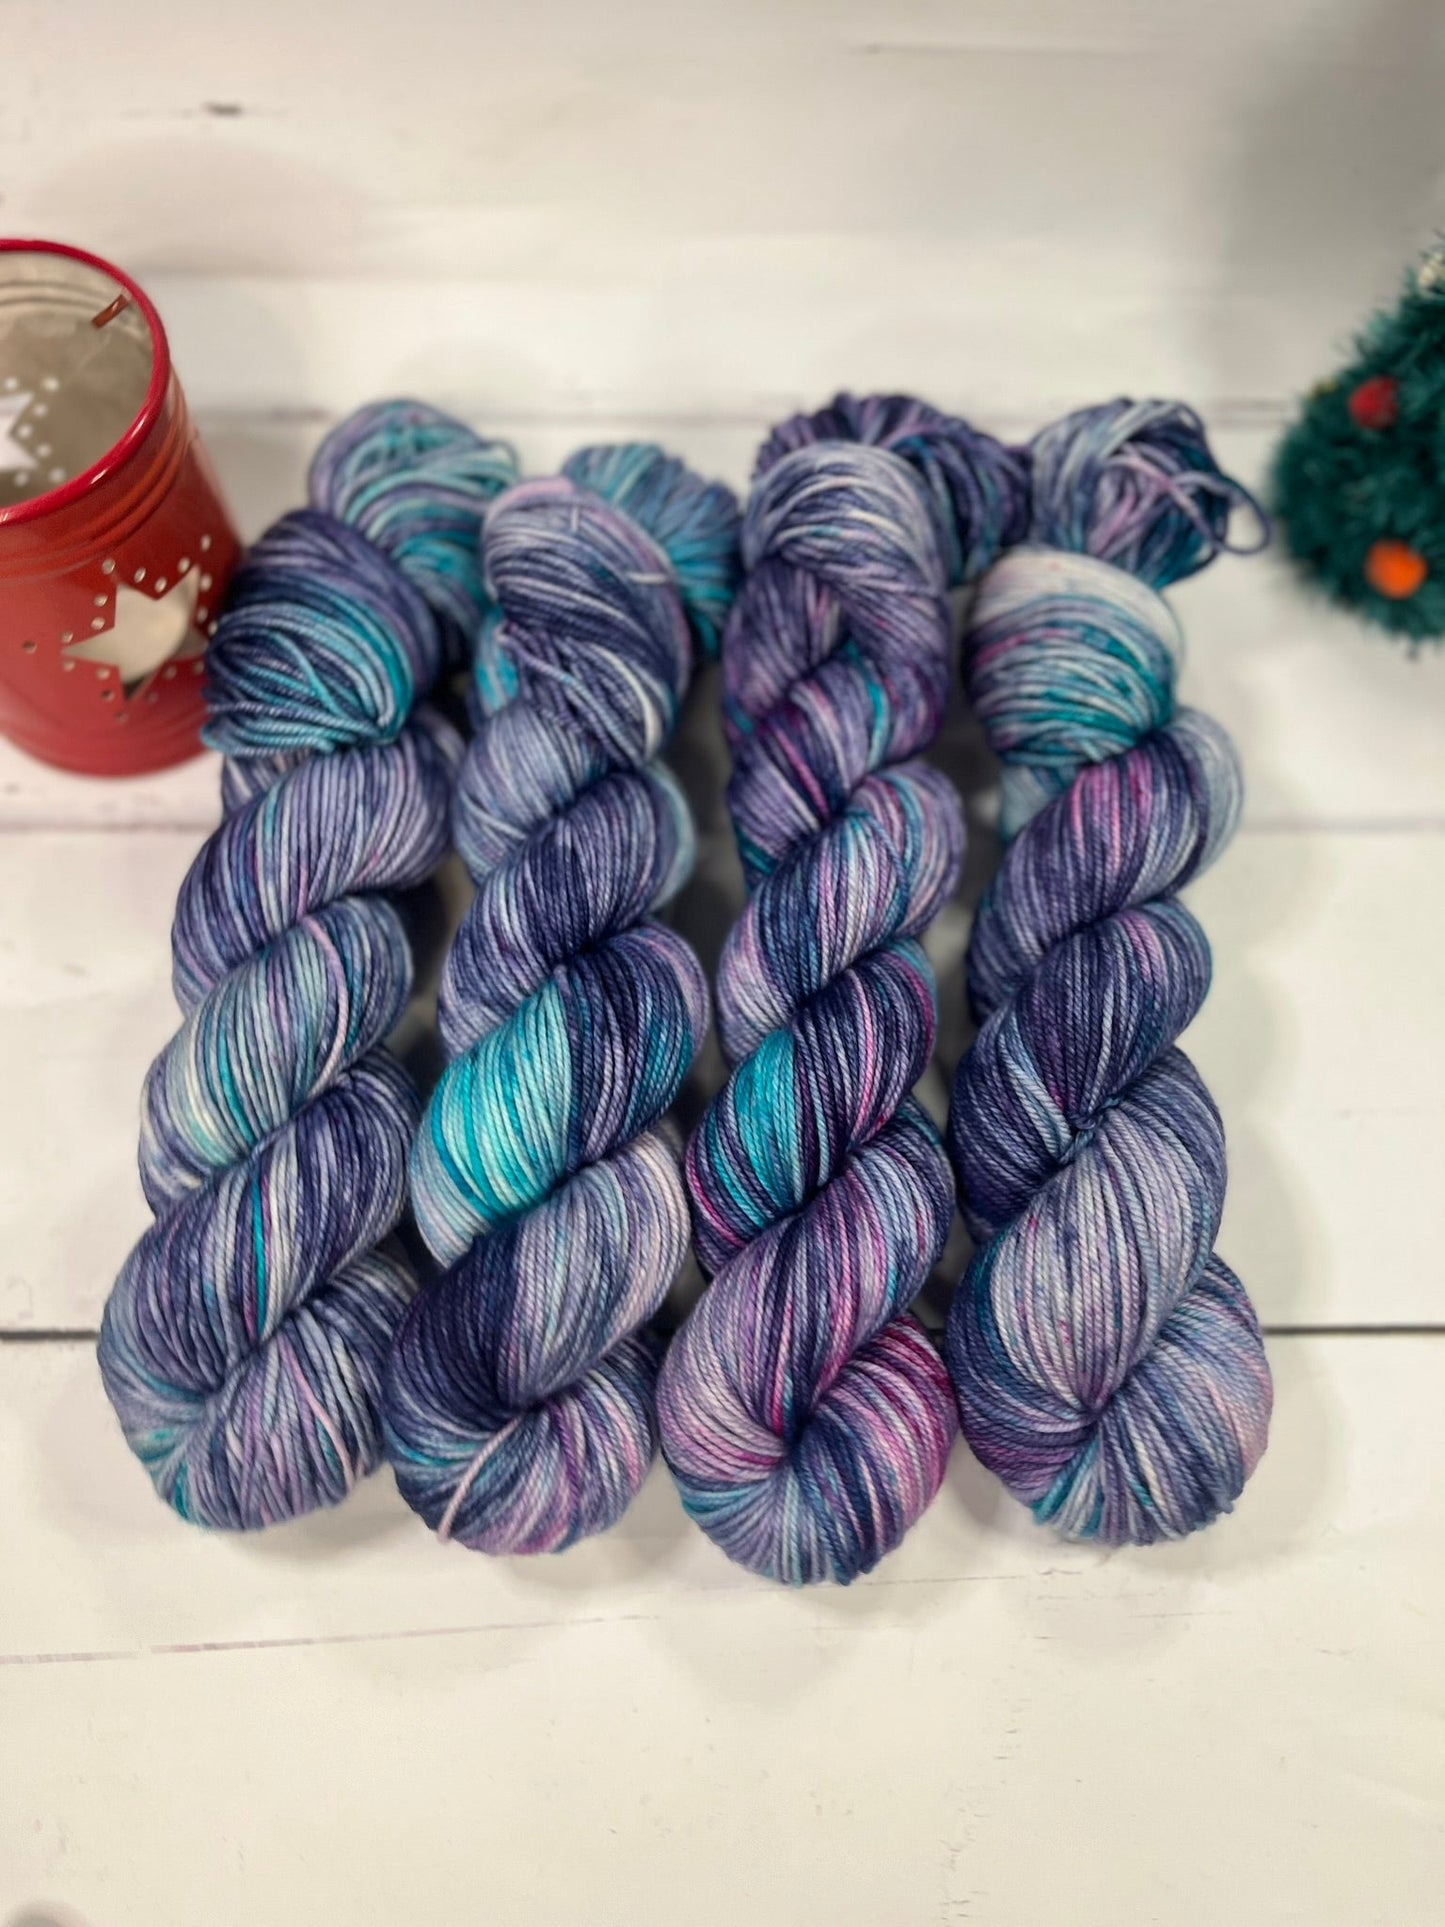 Northern Lights - Silver Sparkle DK - (Christmas Eve Box) - Hand Dyed Yarn - Ready to Ship